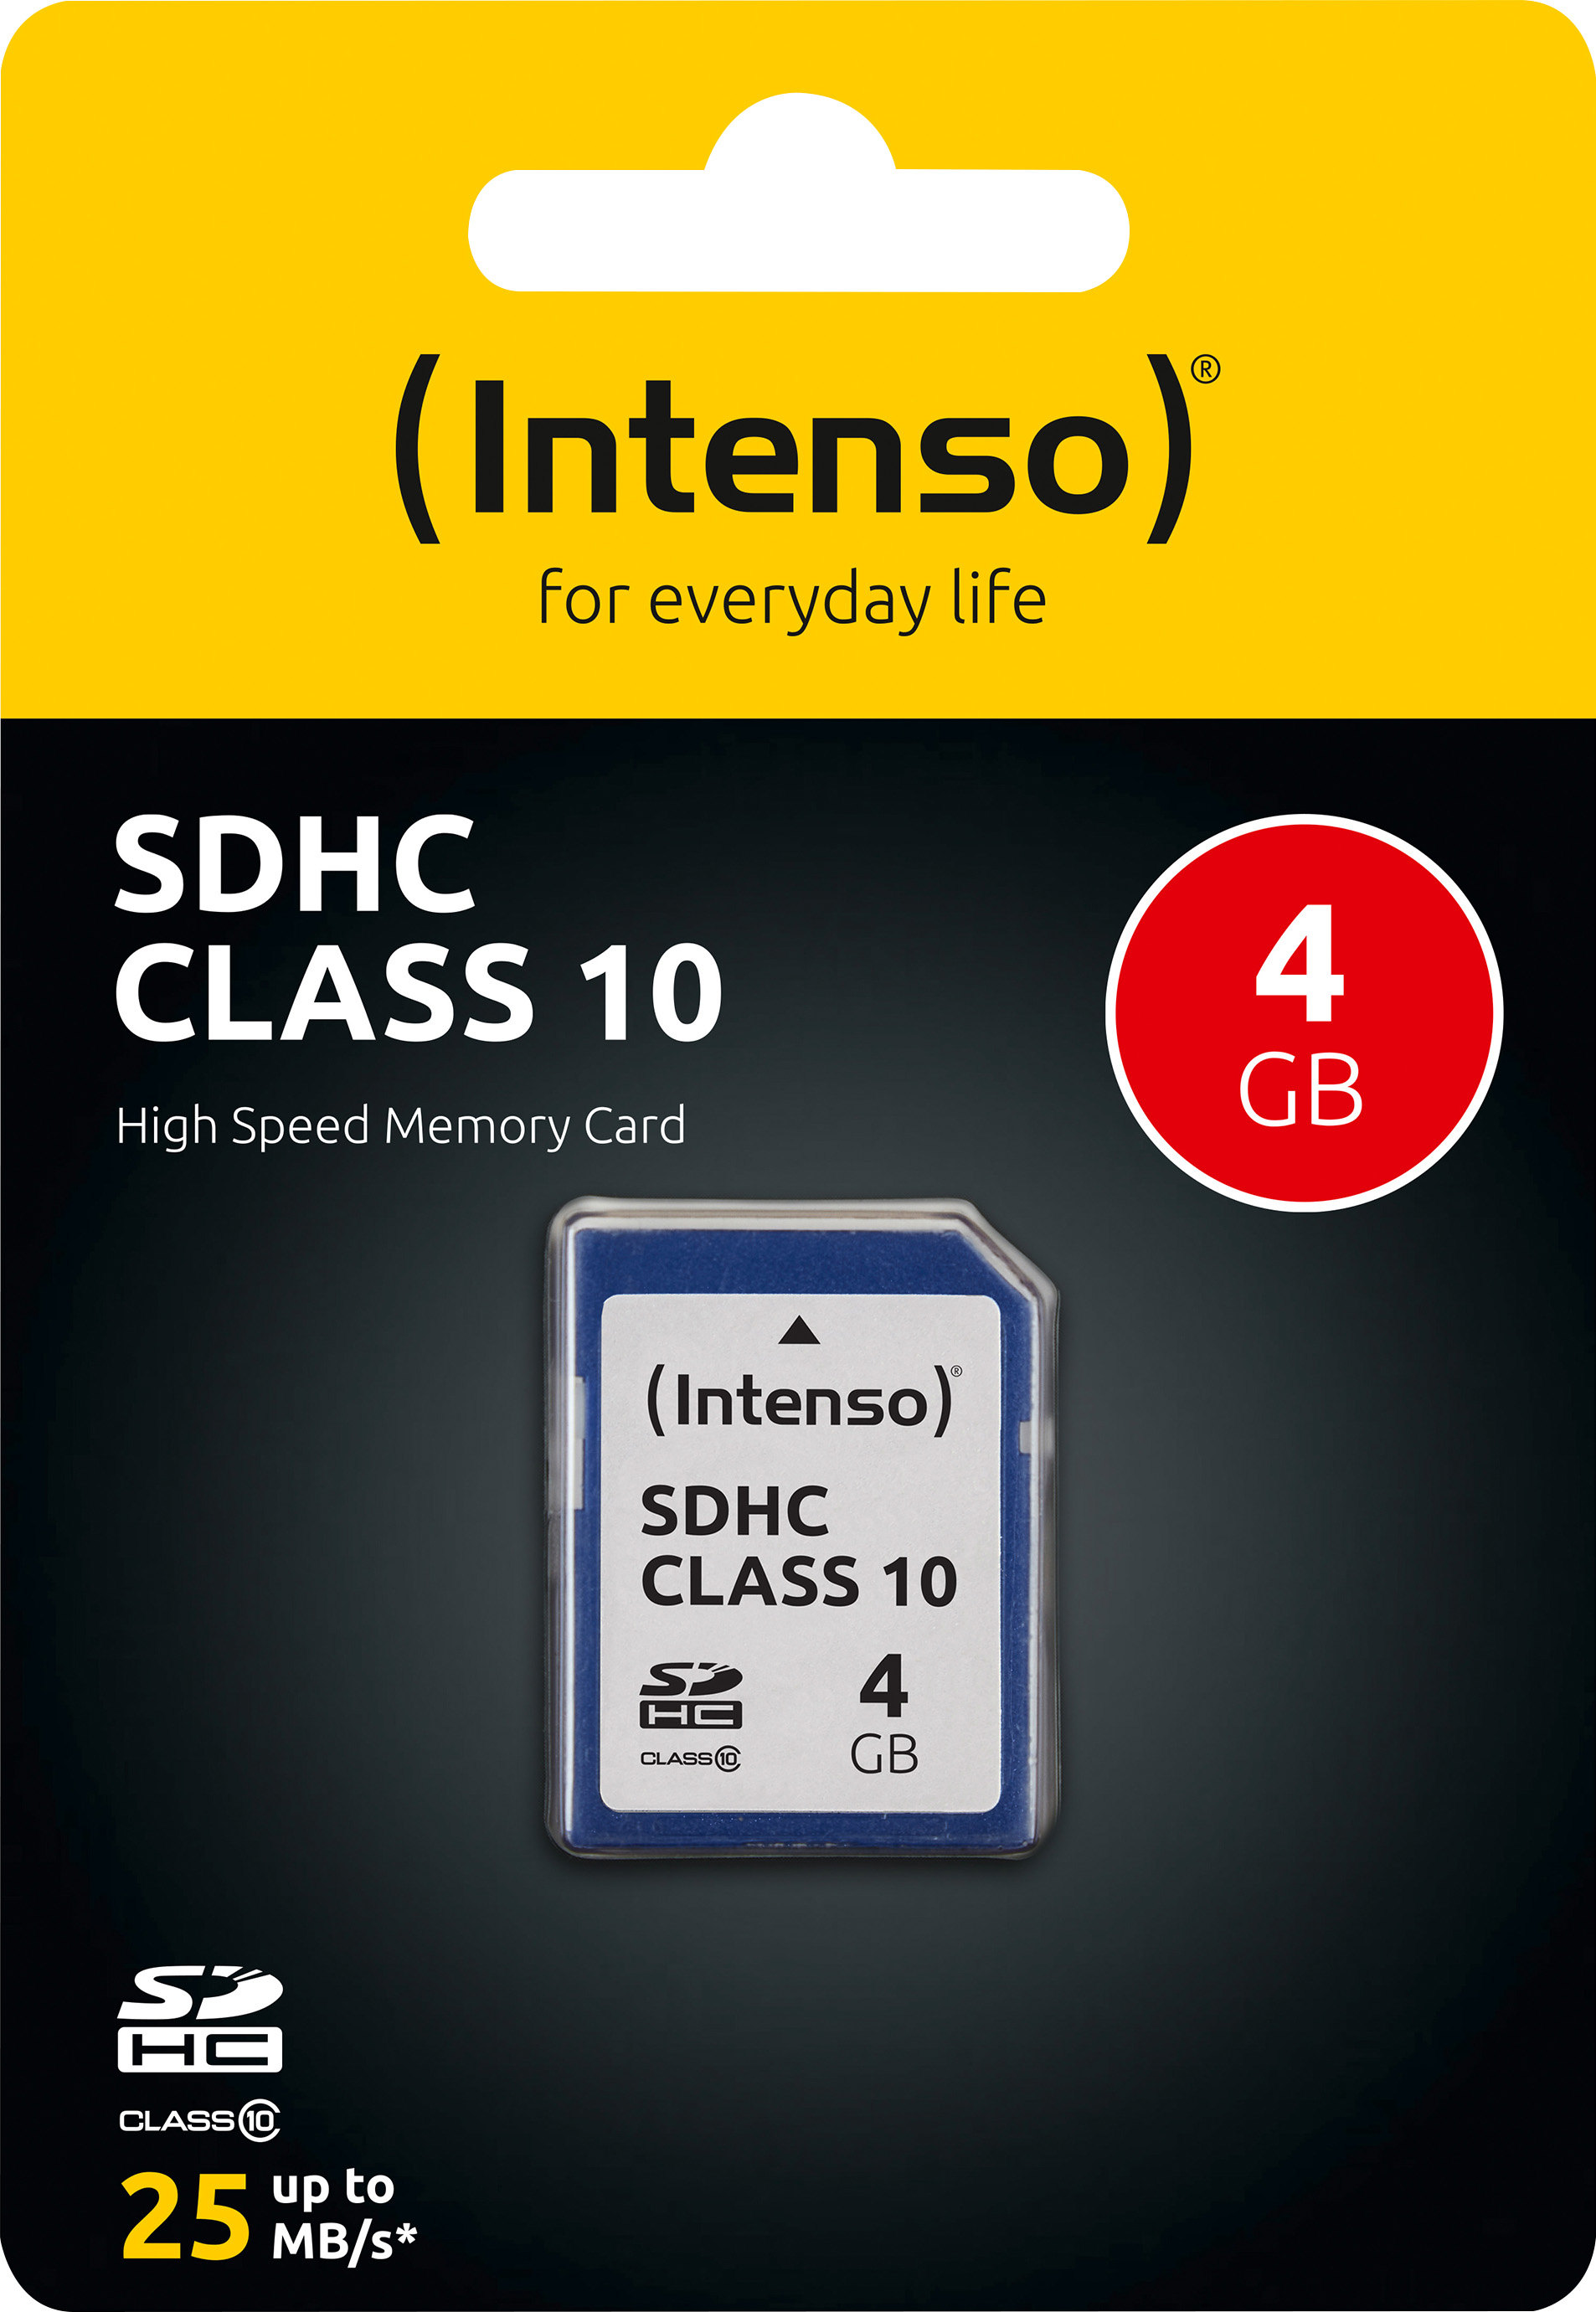 Intenso SDHC-Card 4GB, Class 10 (R) 25MB/s, (W) 10MB/s, Retail-Blister